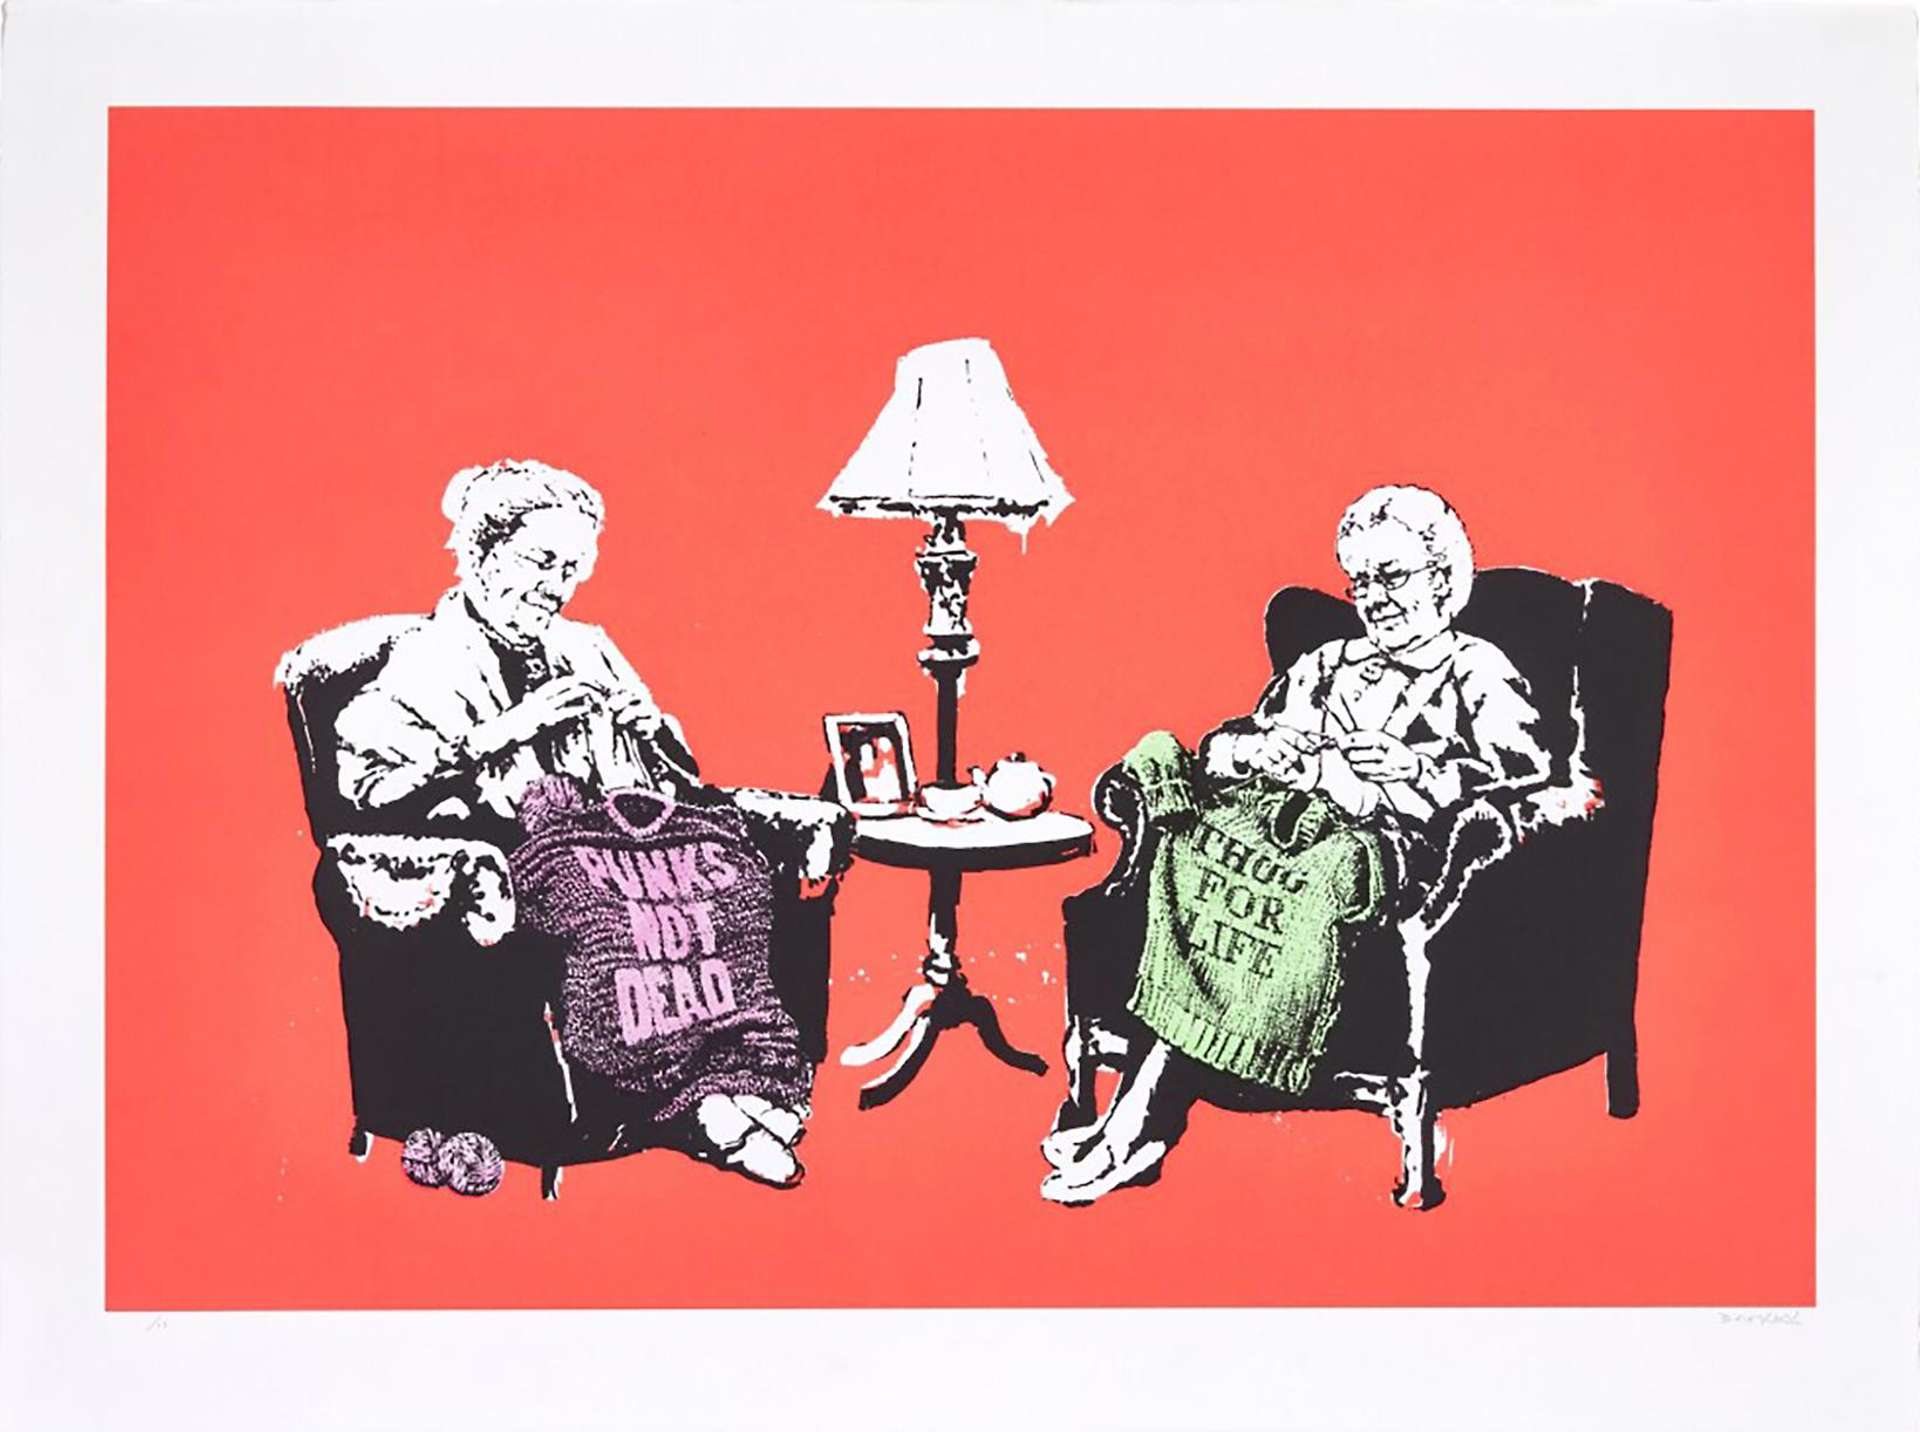 A hand finished screenprint by Banksy depicting two grannies in black and white against a red background, the two grannies knit coloured sweaters which read: “PUNKS NOT DEAD” and “THUG FOR LIFE”